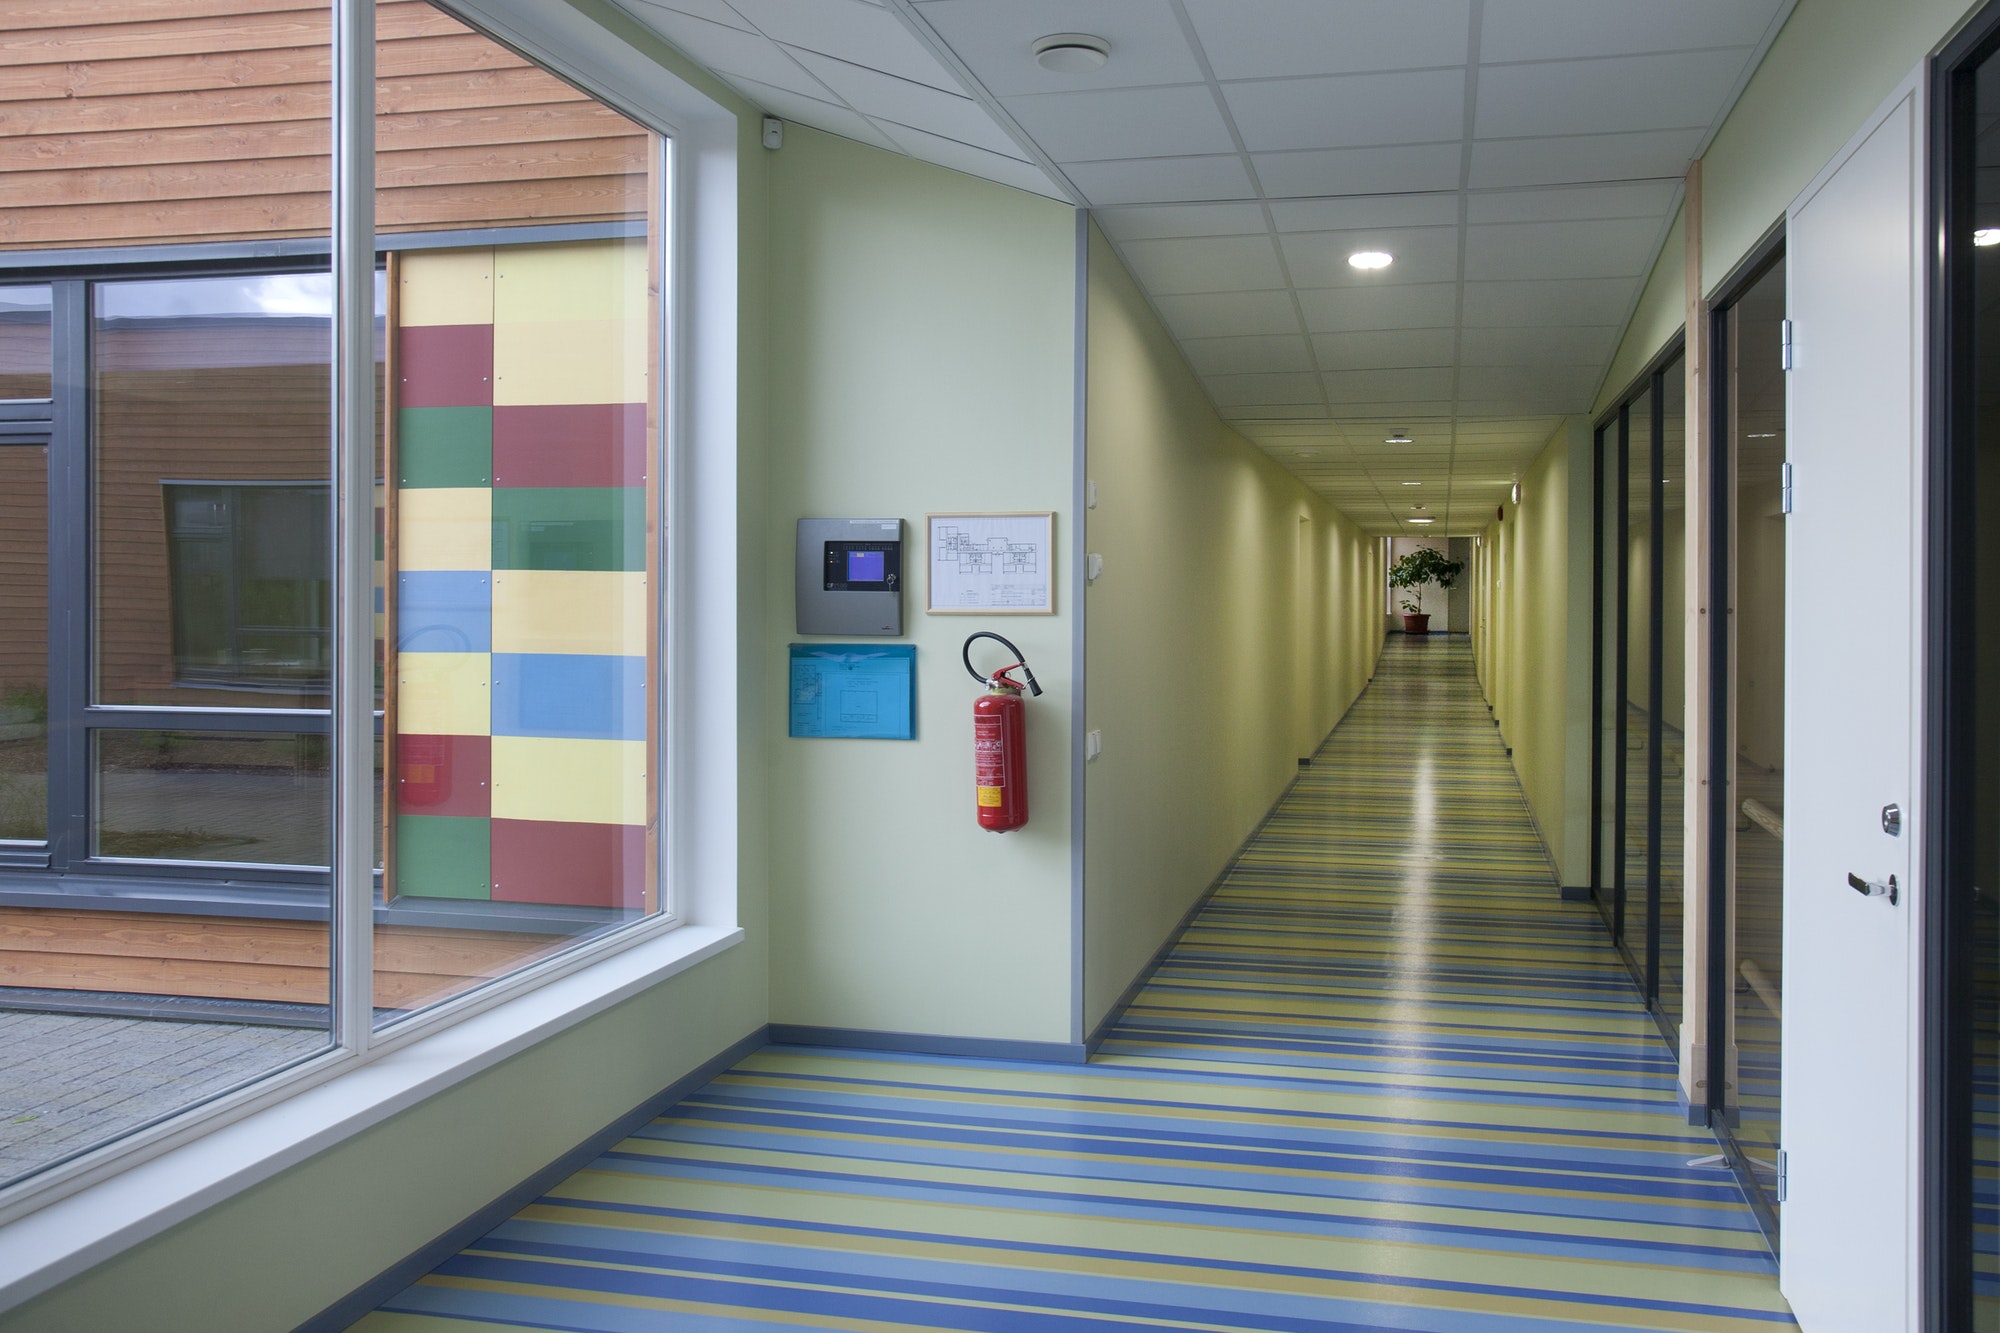 Colorful School Hallway, with a striped floor